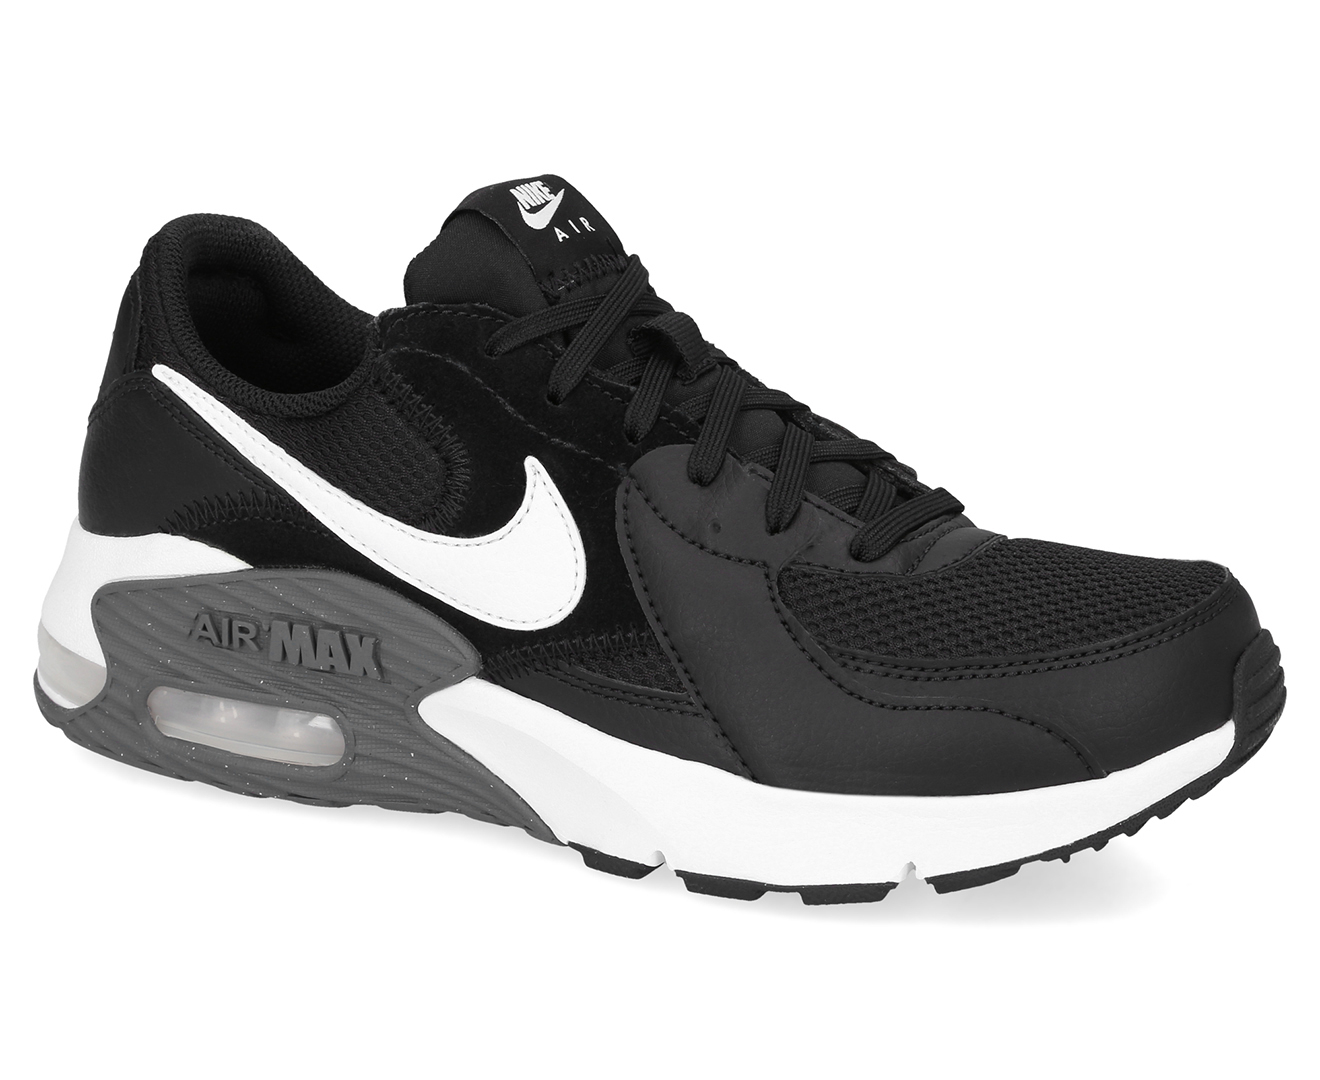 Nike Women's Air Max Excee Sneakers - Black/White/Dark Grey | Catch.co.nz